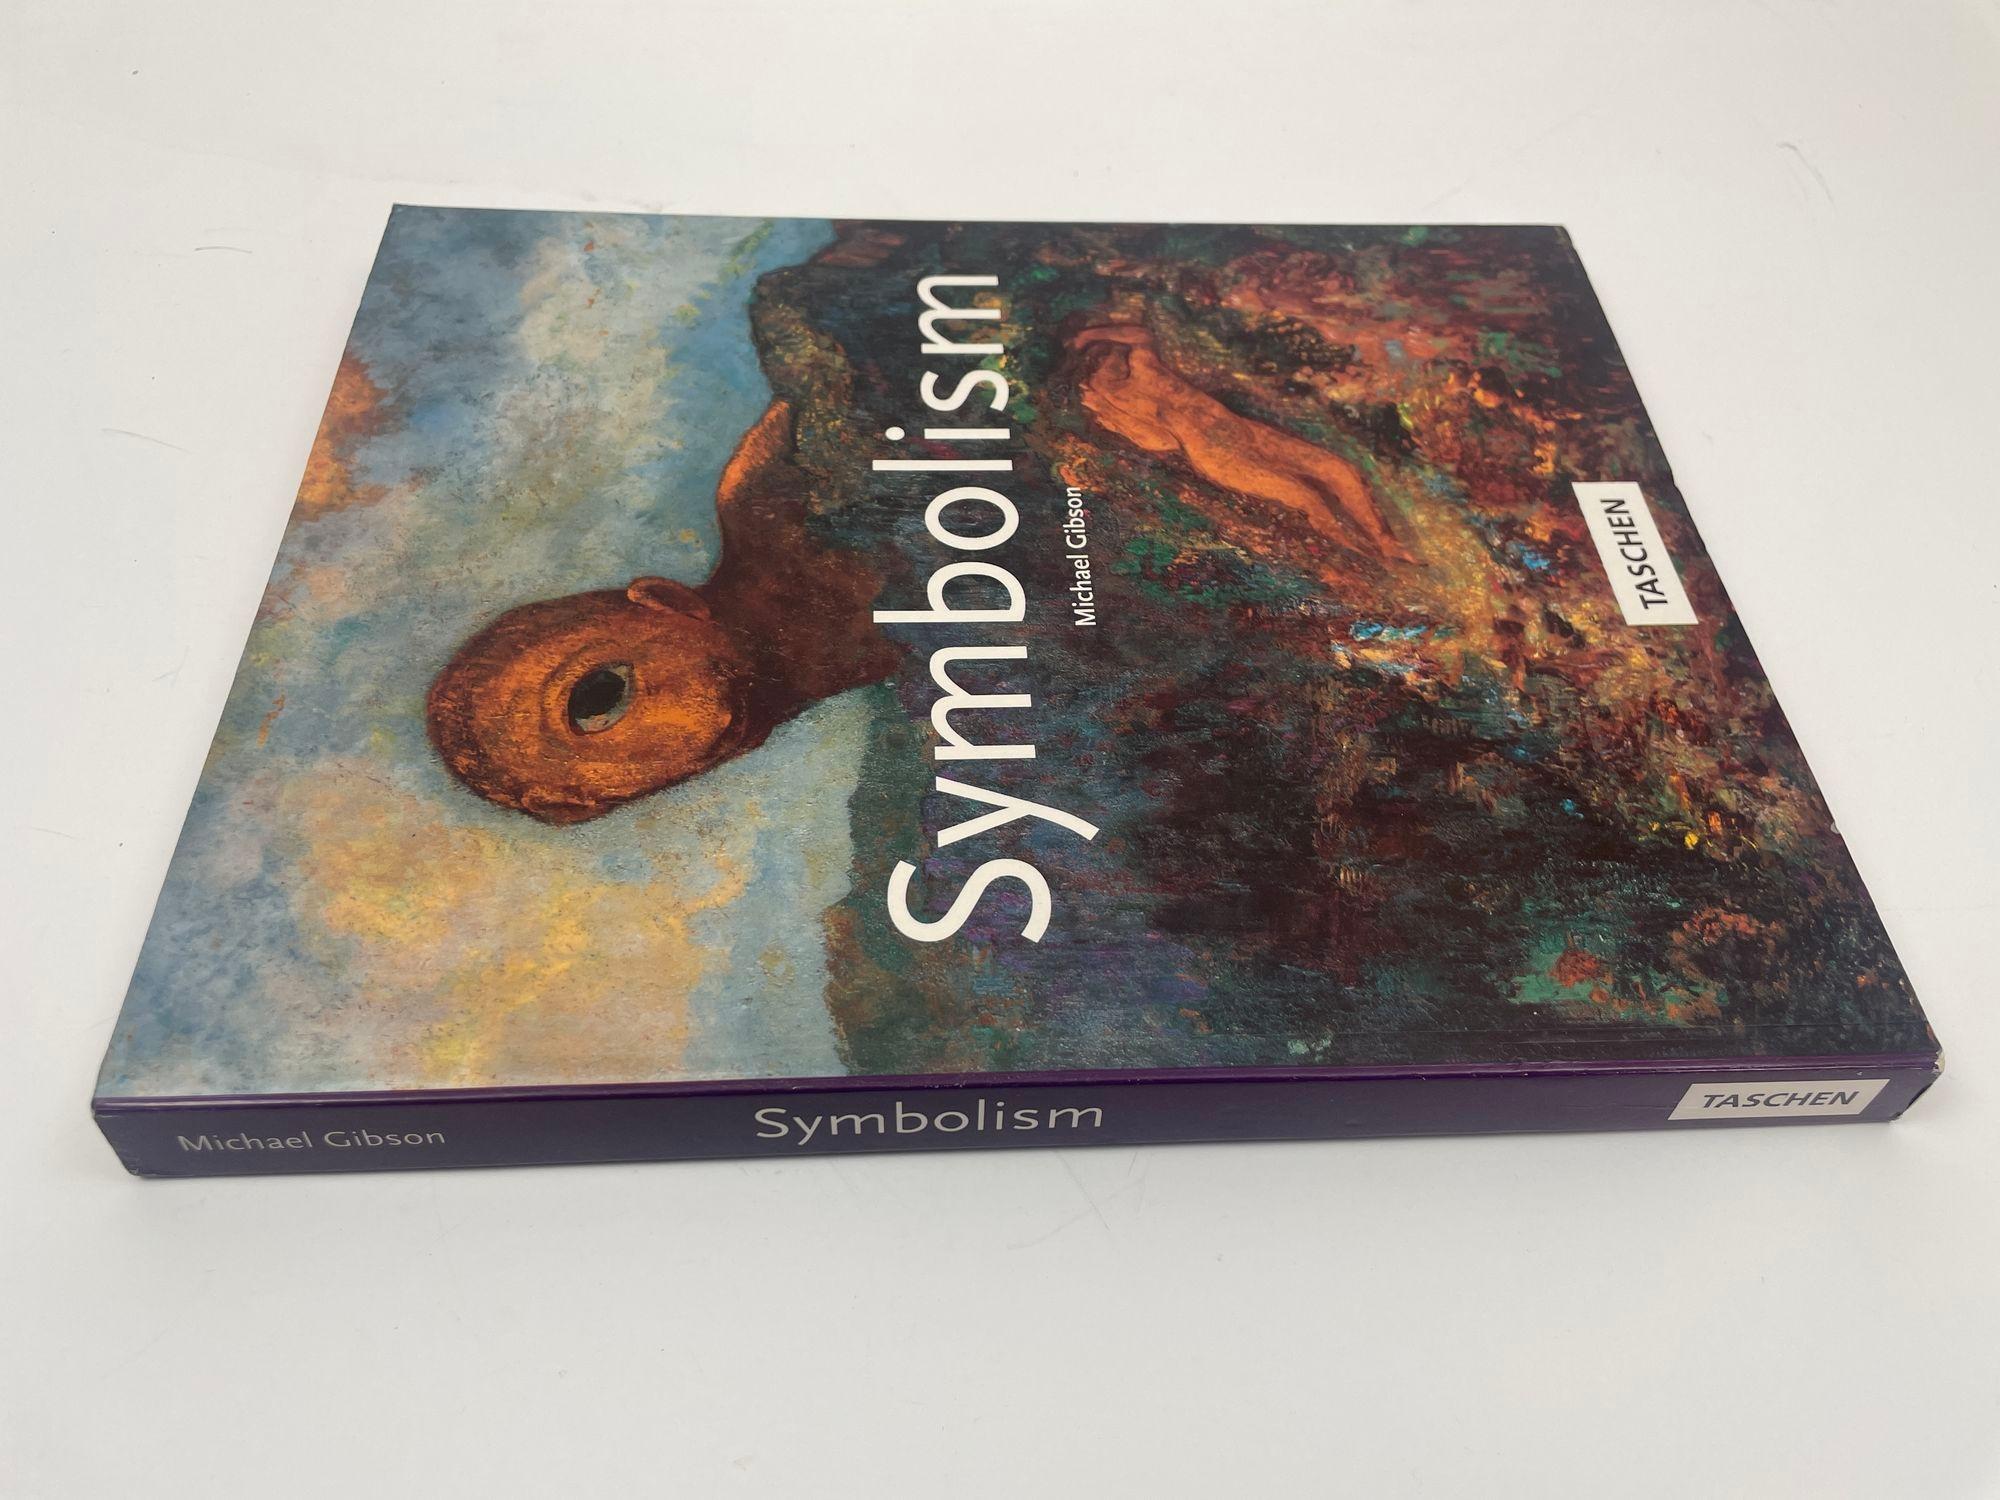 Symbolism Paperback Book 1995 by Michael Gibson, 1st edition 1st printing.A study of the Symbolist movement, which emerged in the mid to late 19th century and expired during World War I. Introductory essay, biographical sketches of Symbolist